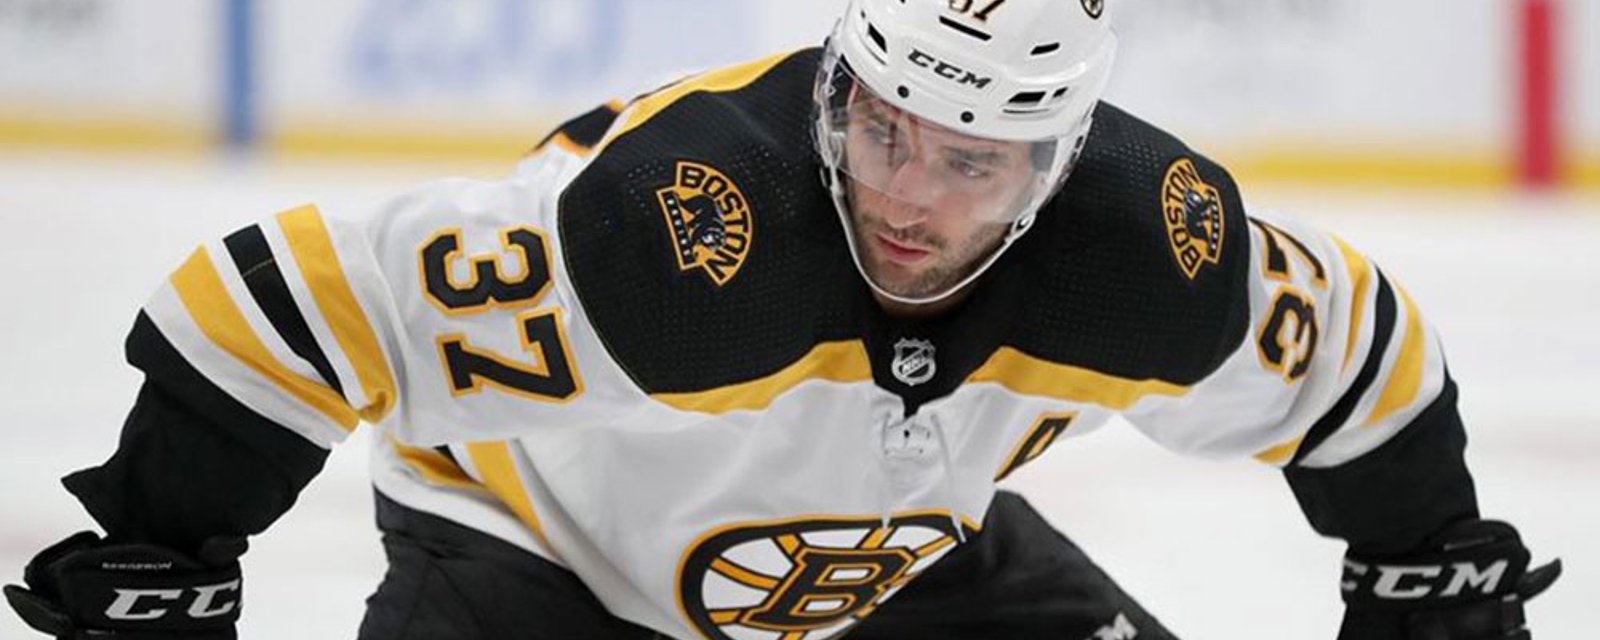 Preview: Guess who's back? Back again... Bergy's back, tell a friend!